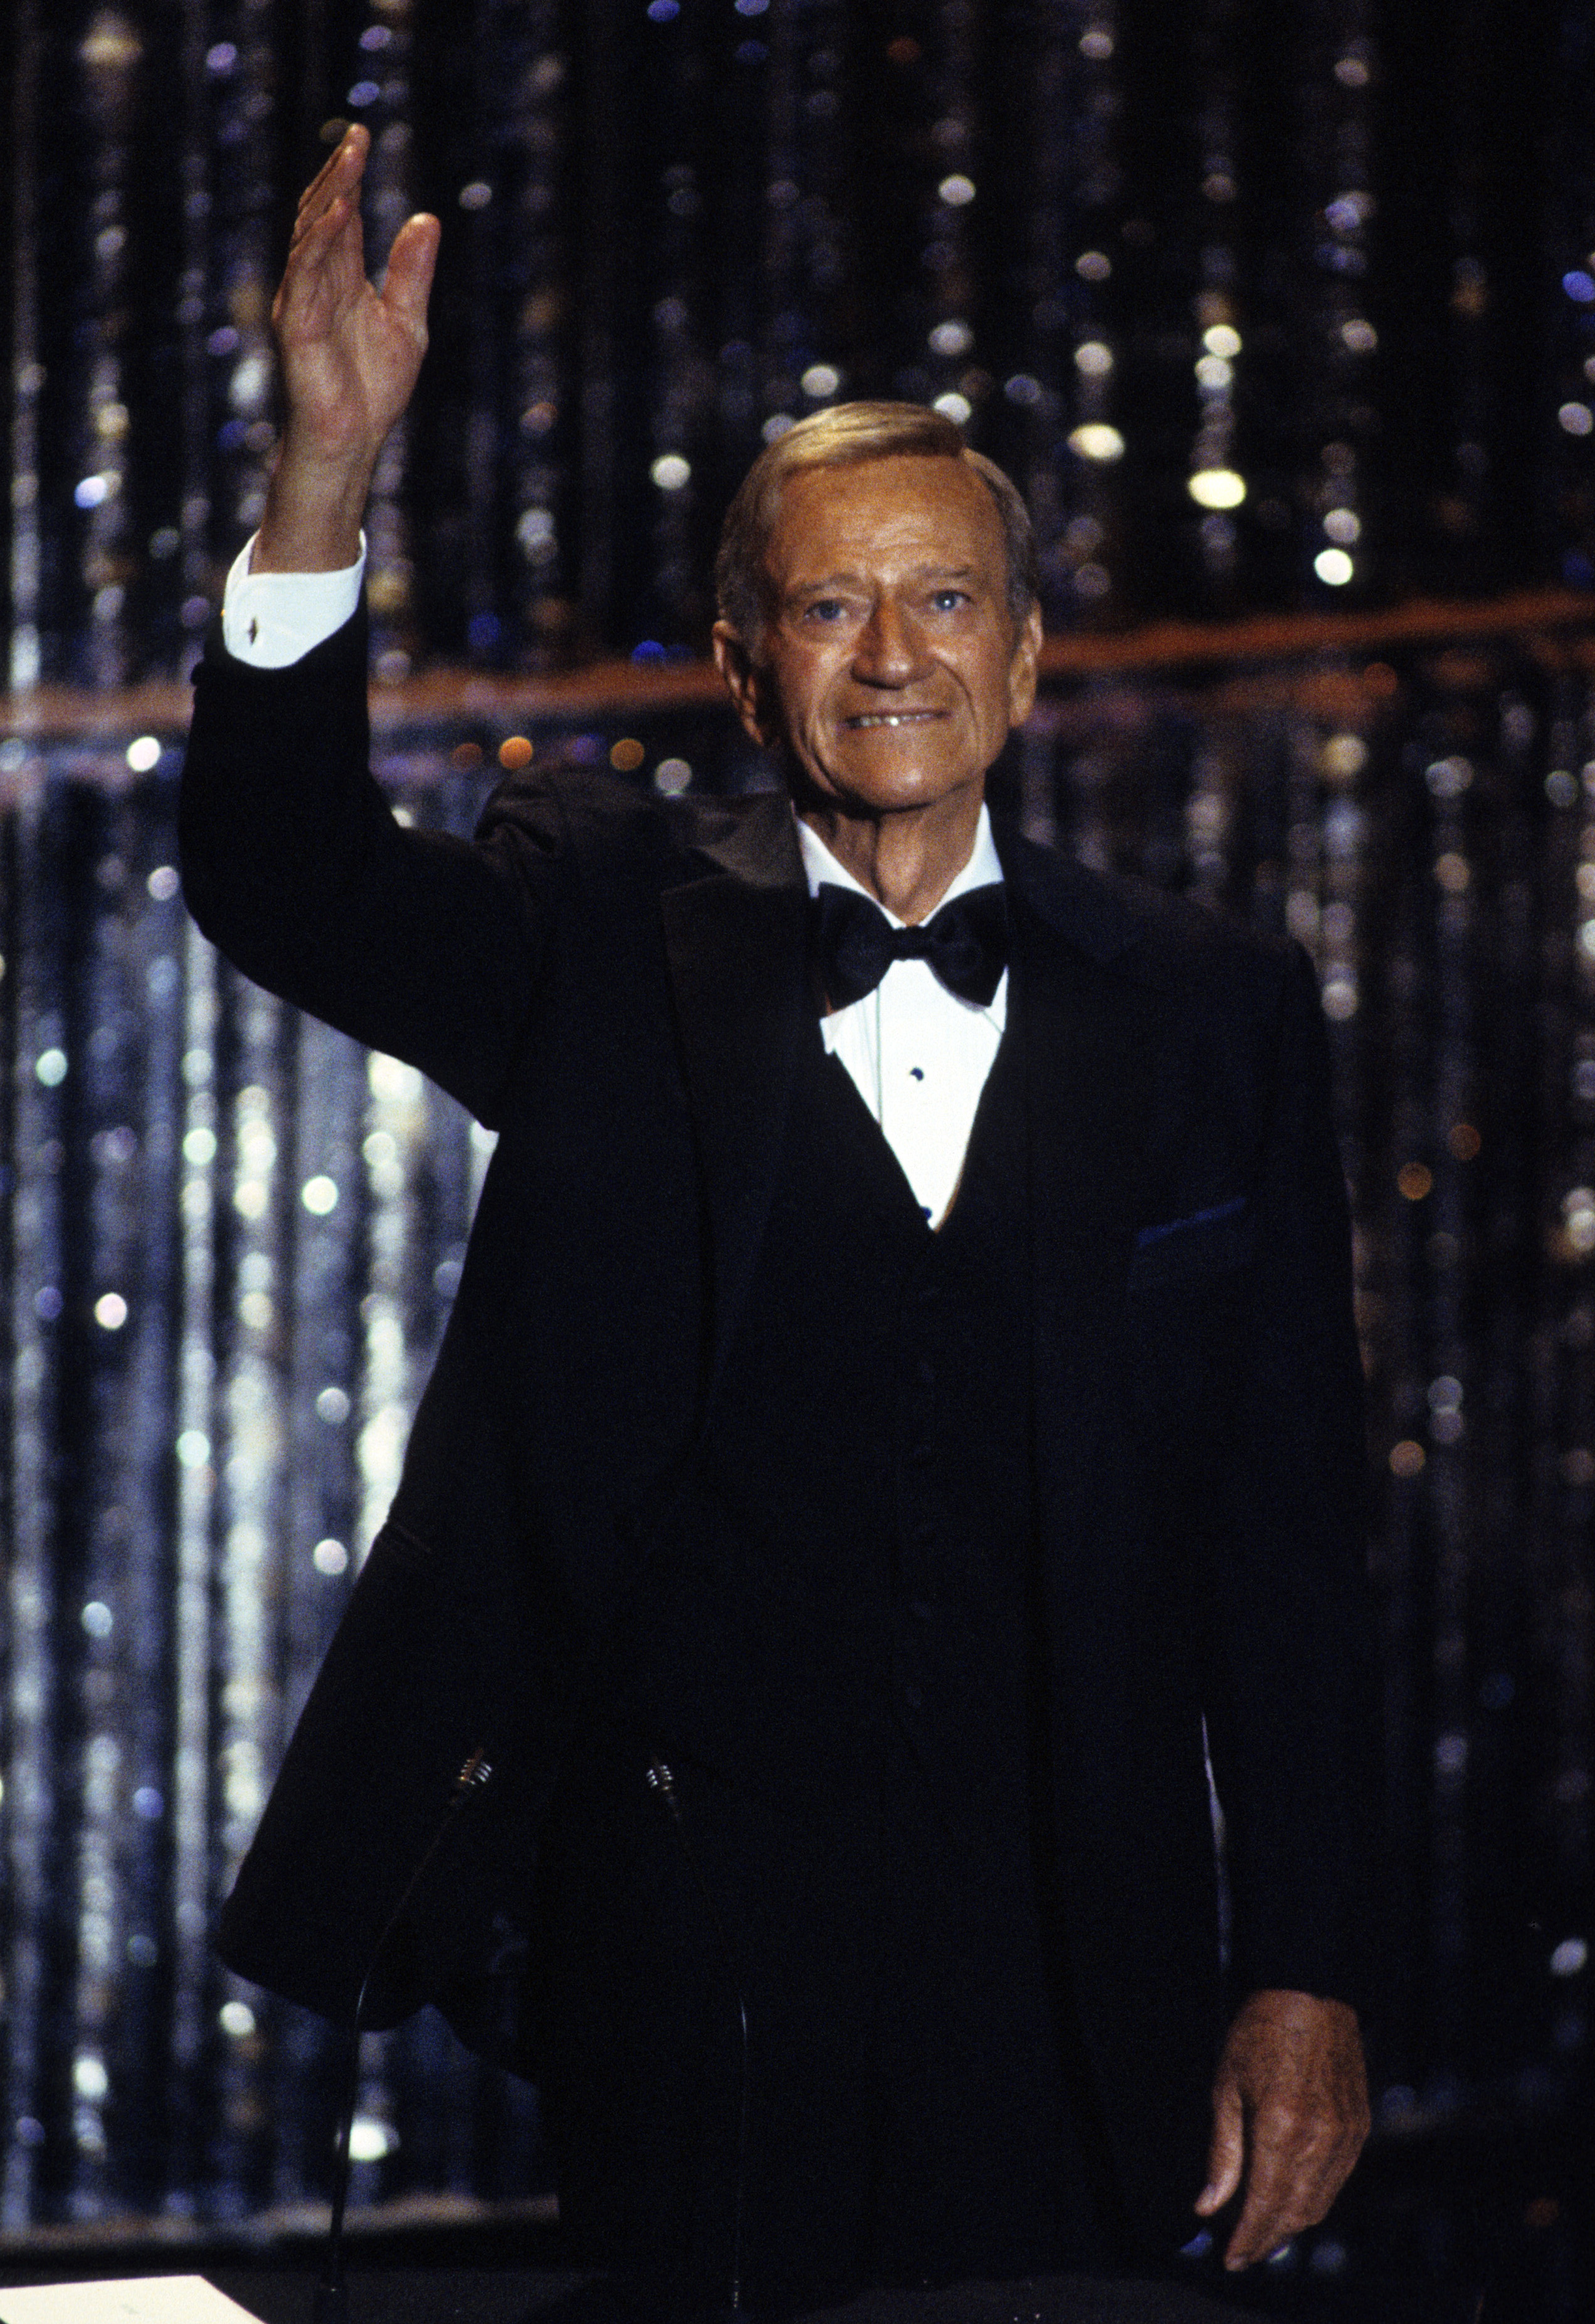 John Wayne at the Annual Academy Awards, 1979. | Source: Getty Images